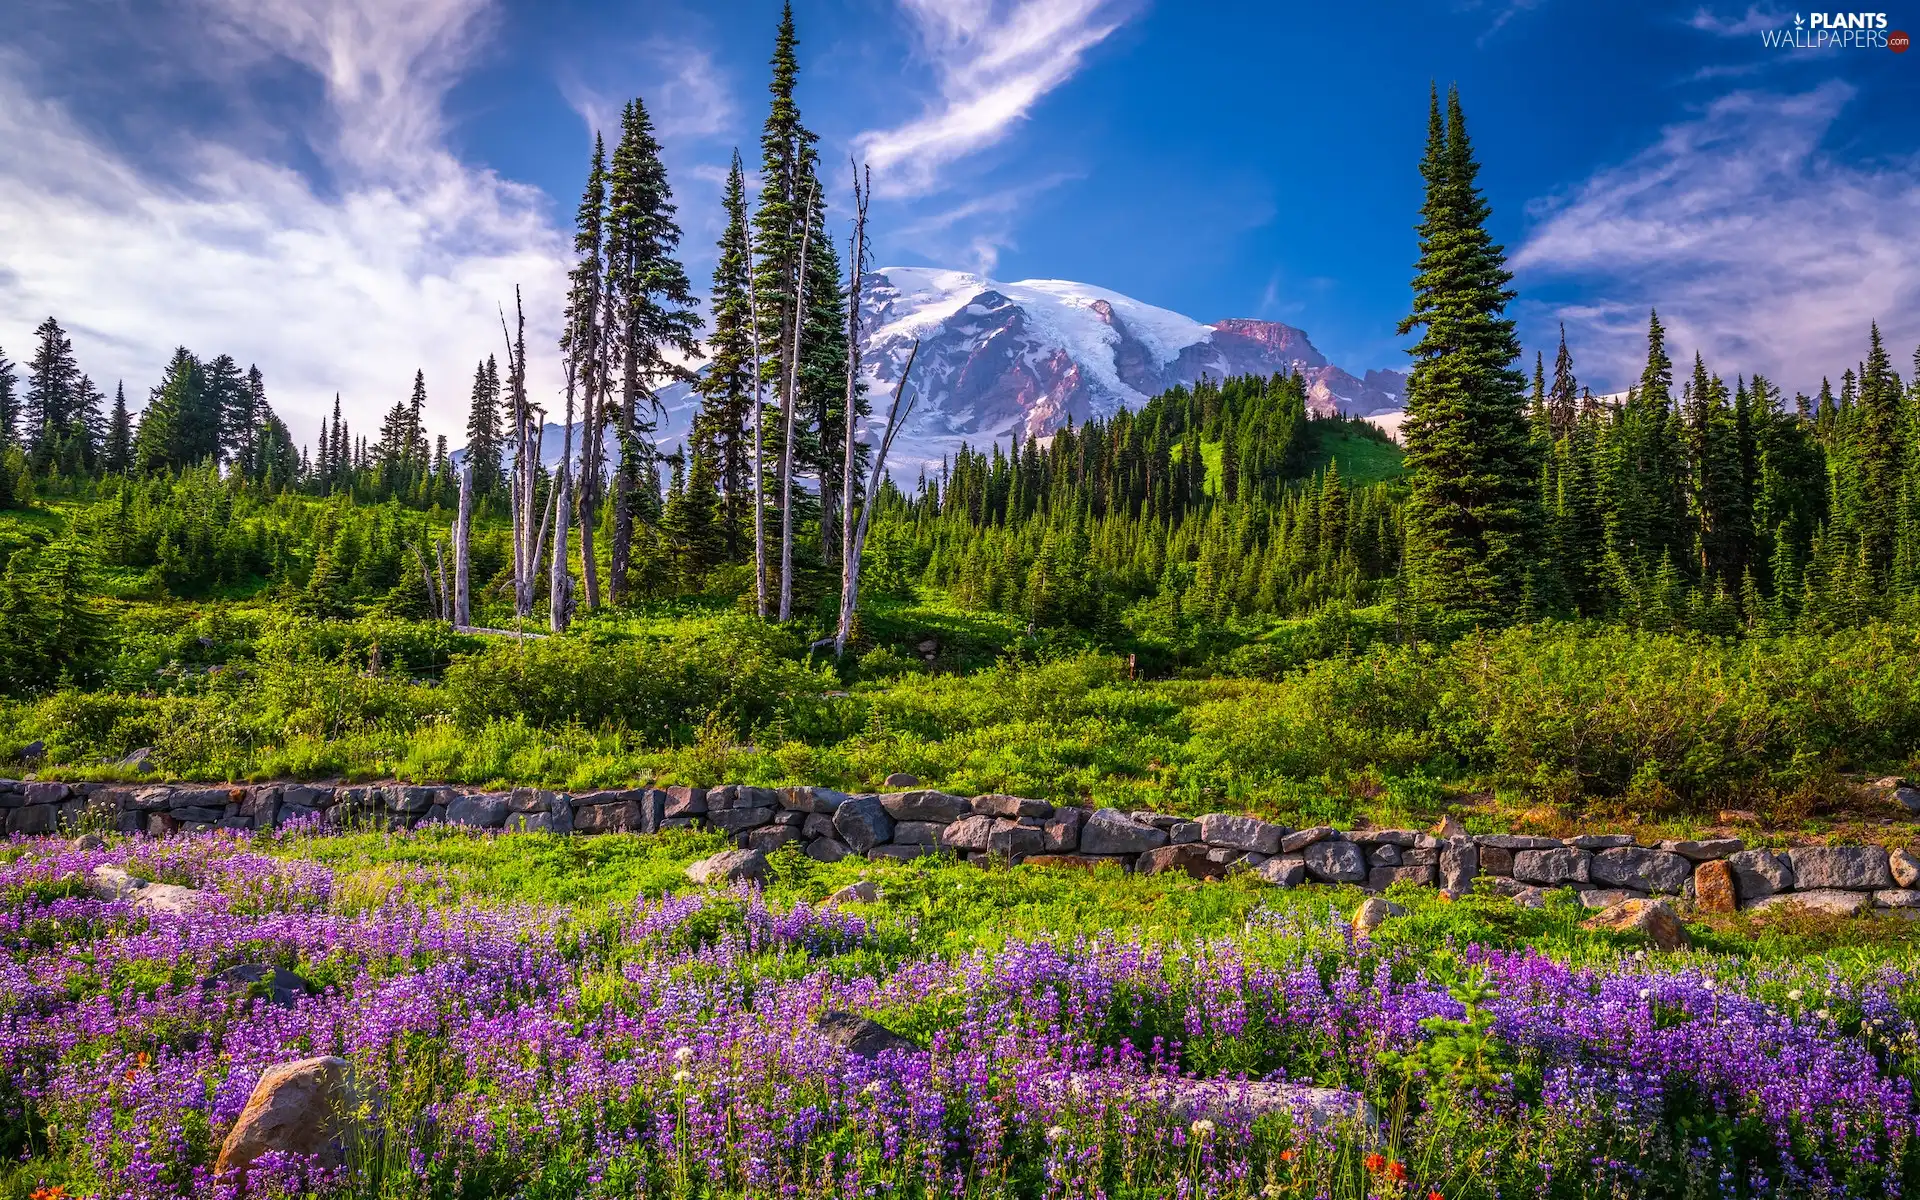 Washington State, The United States, Mount Rainier National Park, Mountains, Flowers, lupine, viewes, Meadow, trees